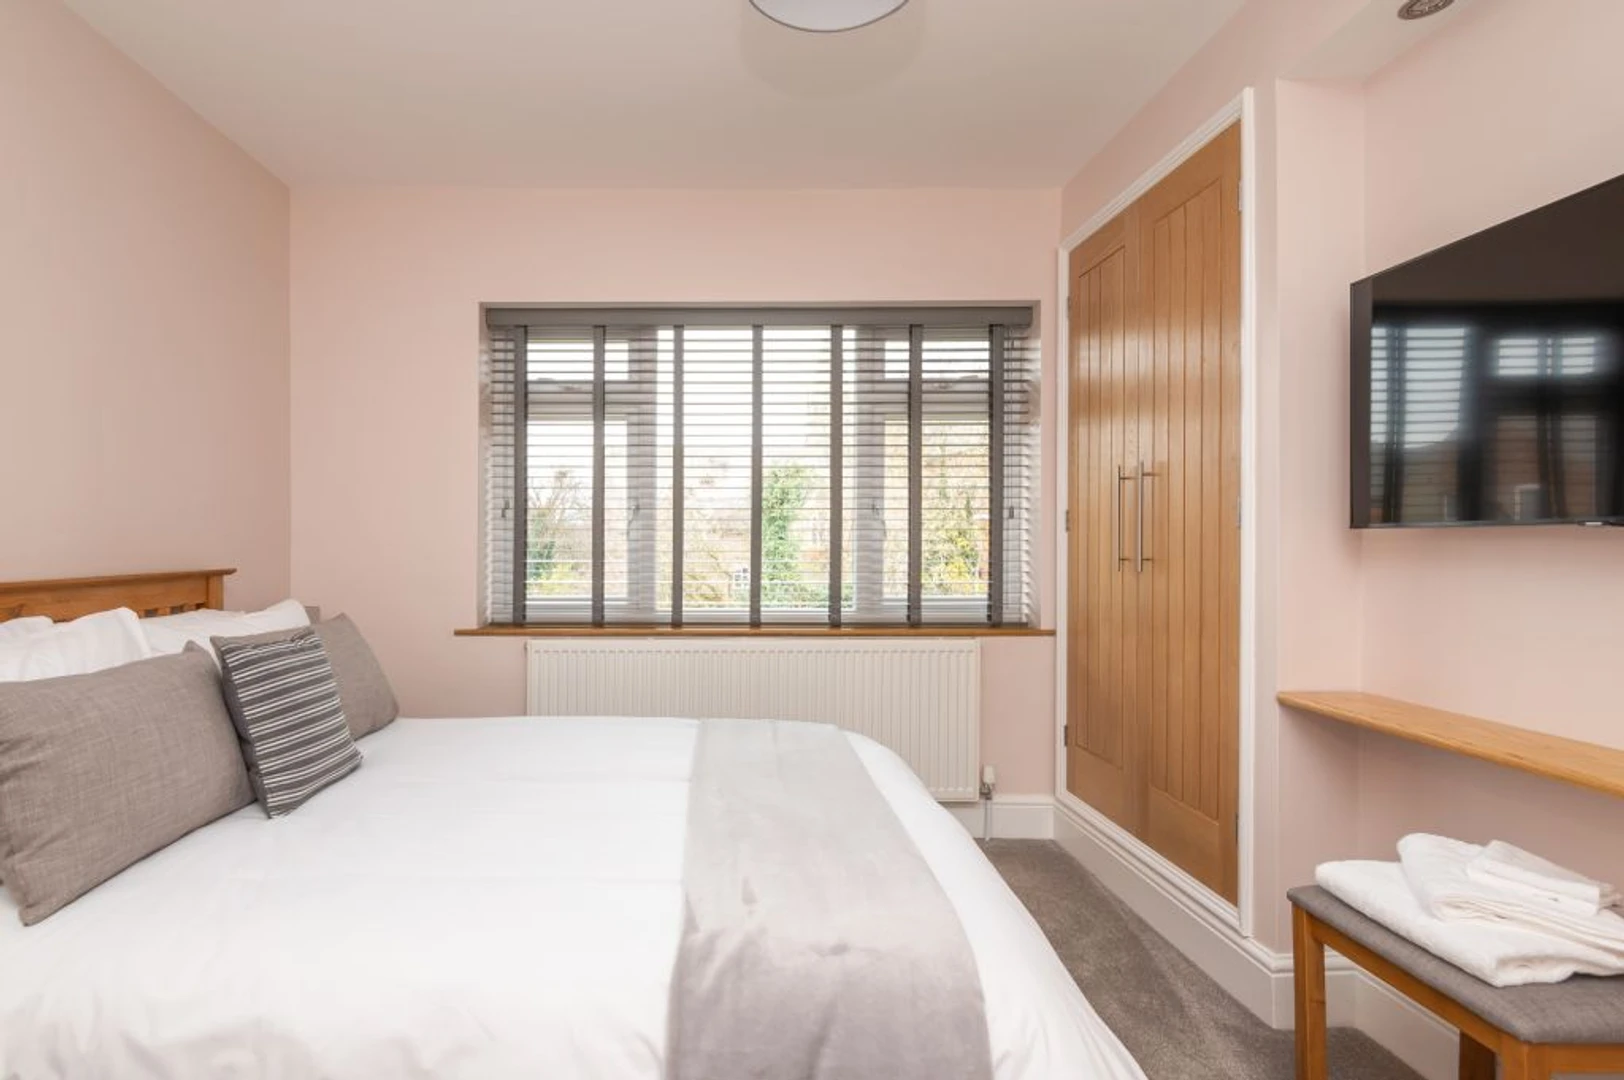 Accommodation in the centre of York